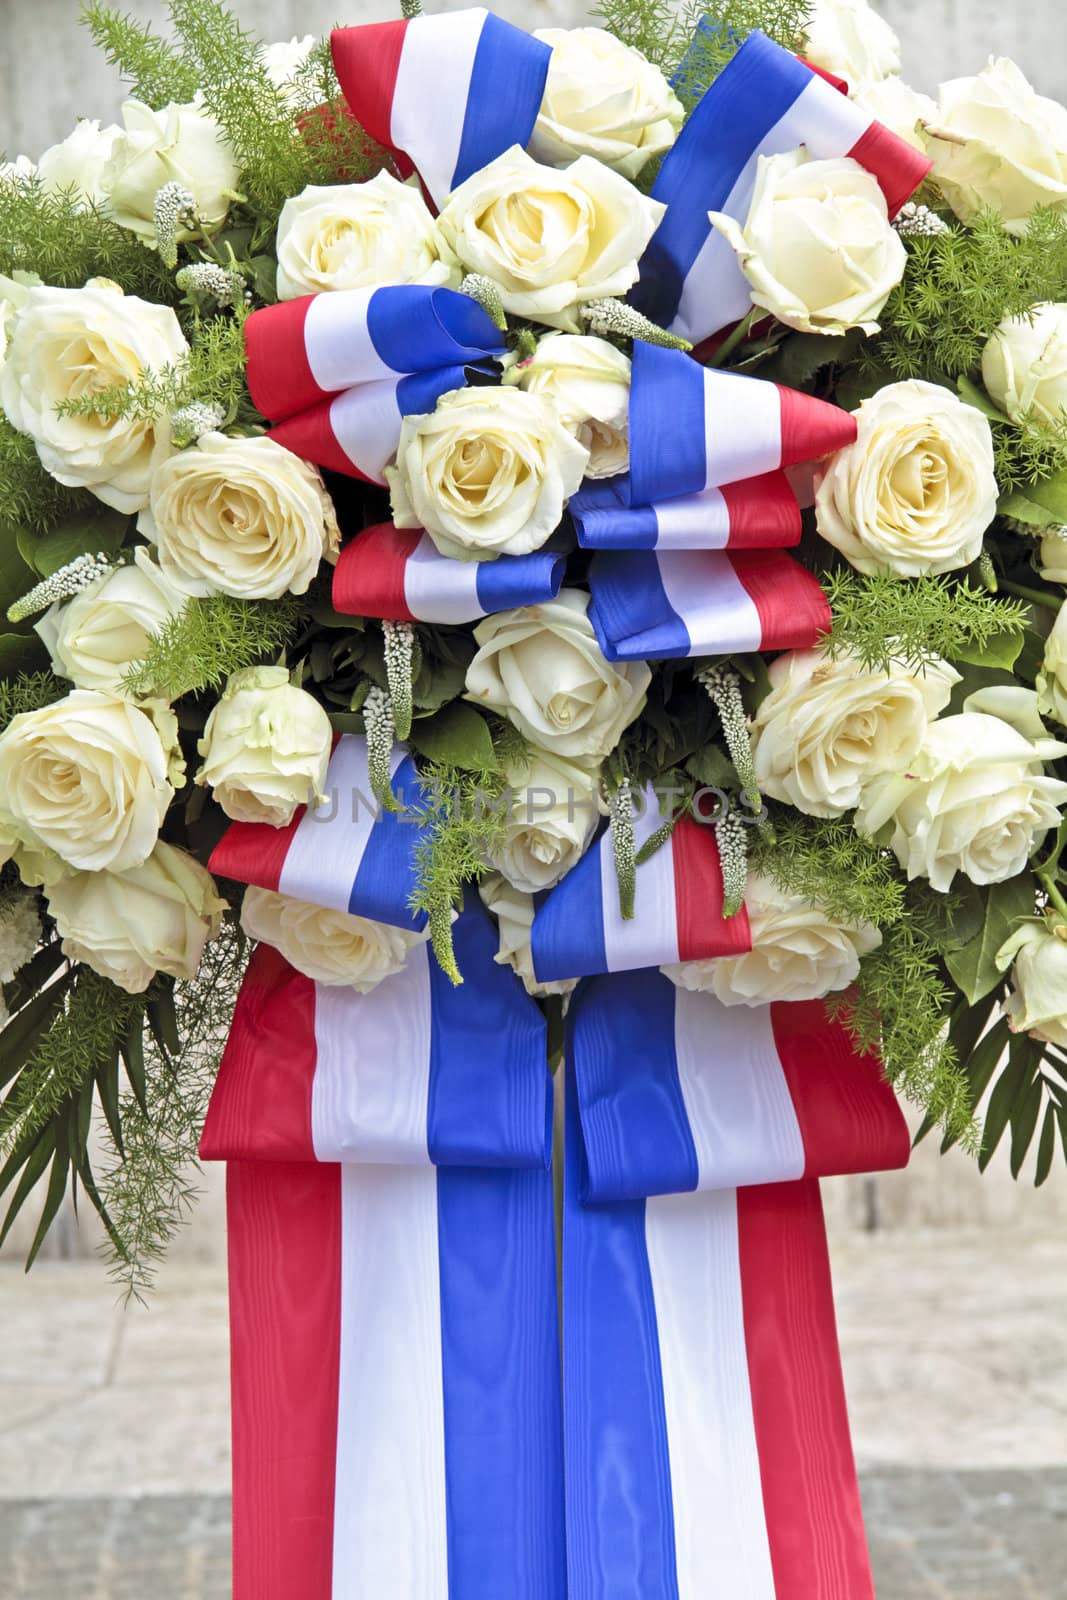 White roses and the dutch national flag